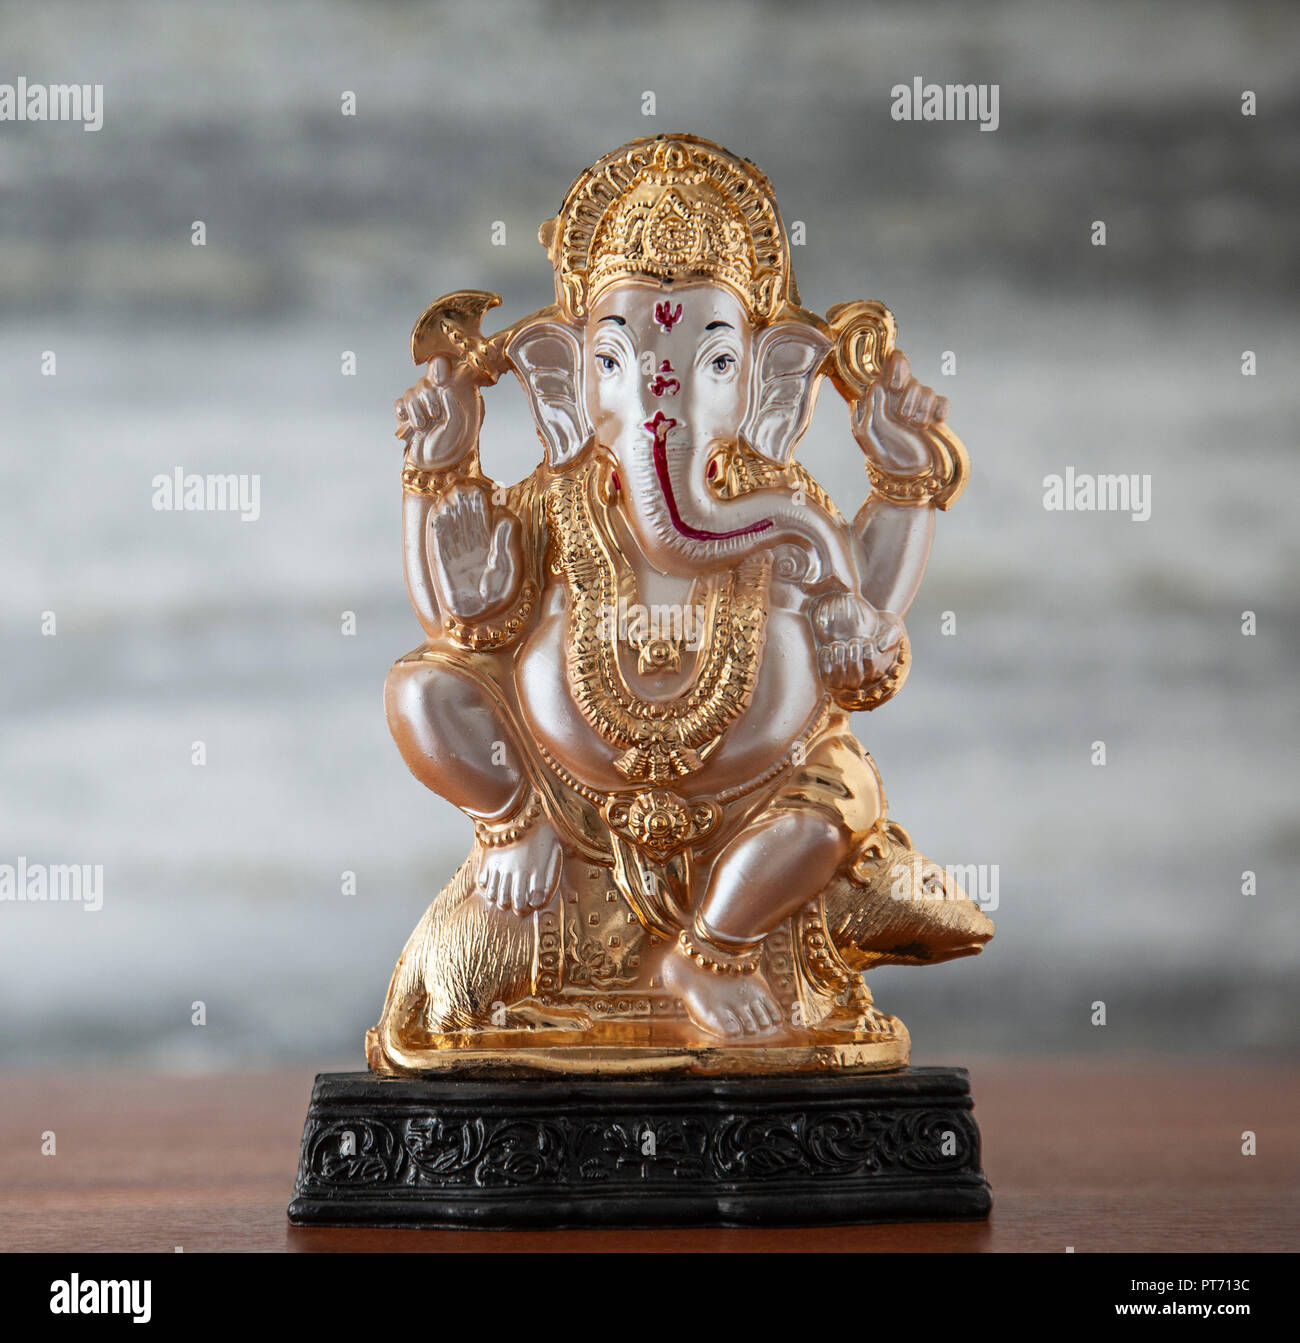 A small plastic murti of the Hindu deity Ganesh / Ganesha, sniffing a rice cake, riding a rat / mouse and holding an axe and noose. Stock Photo